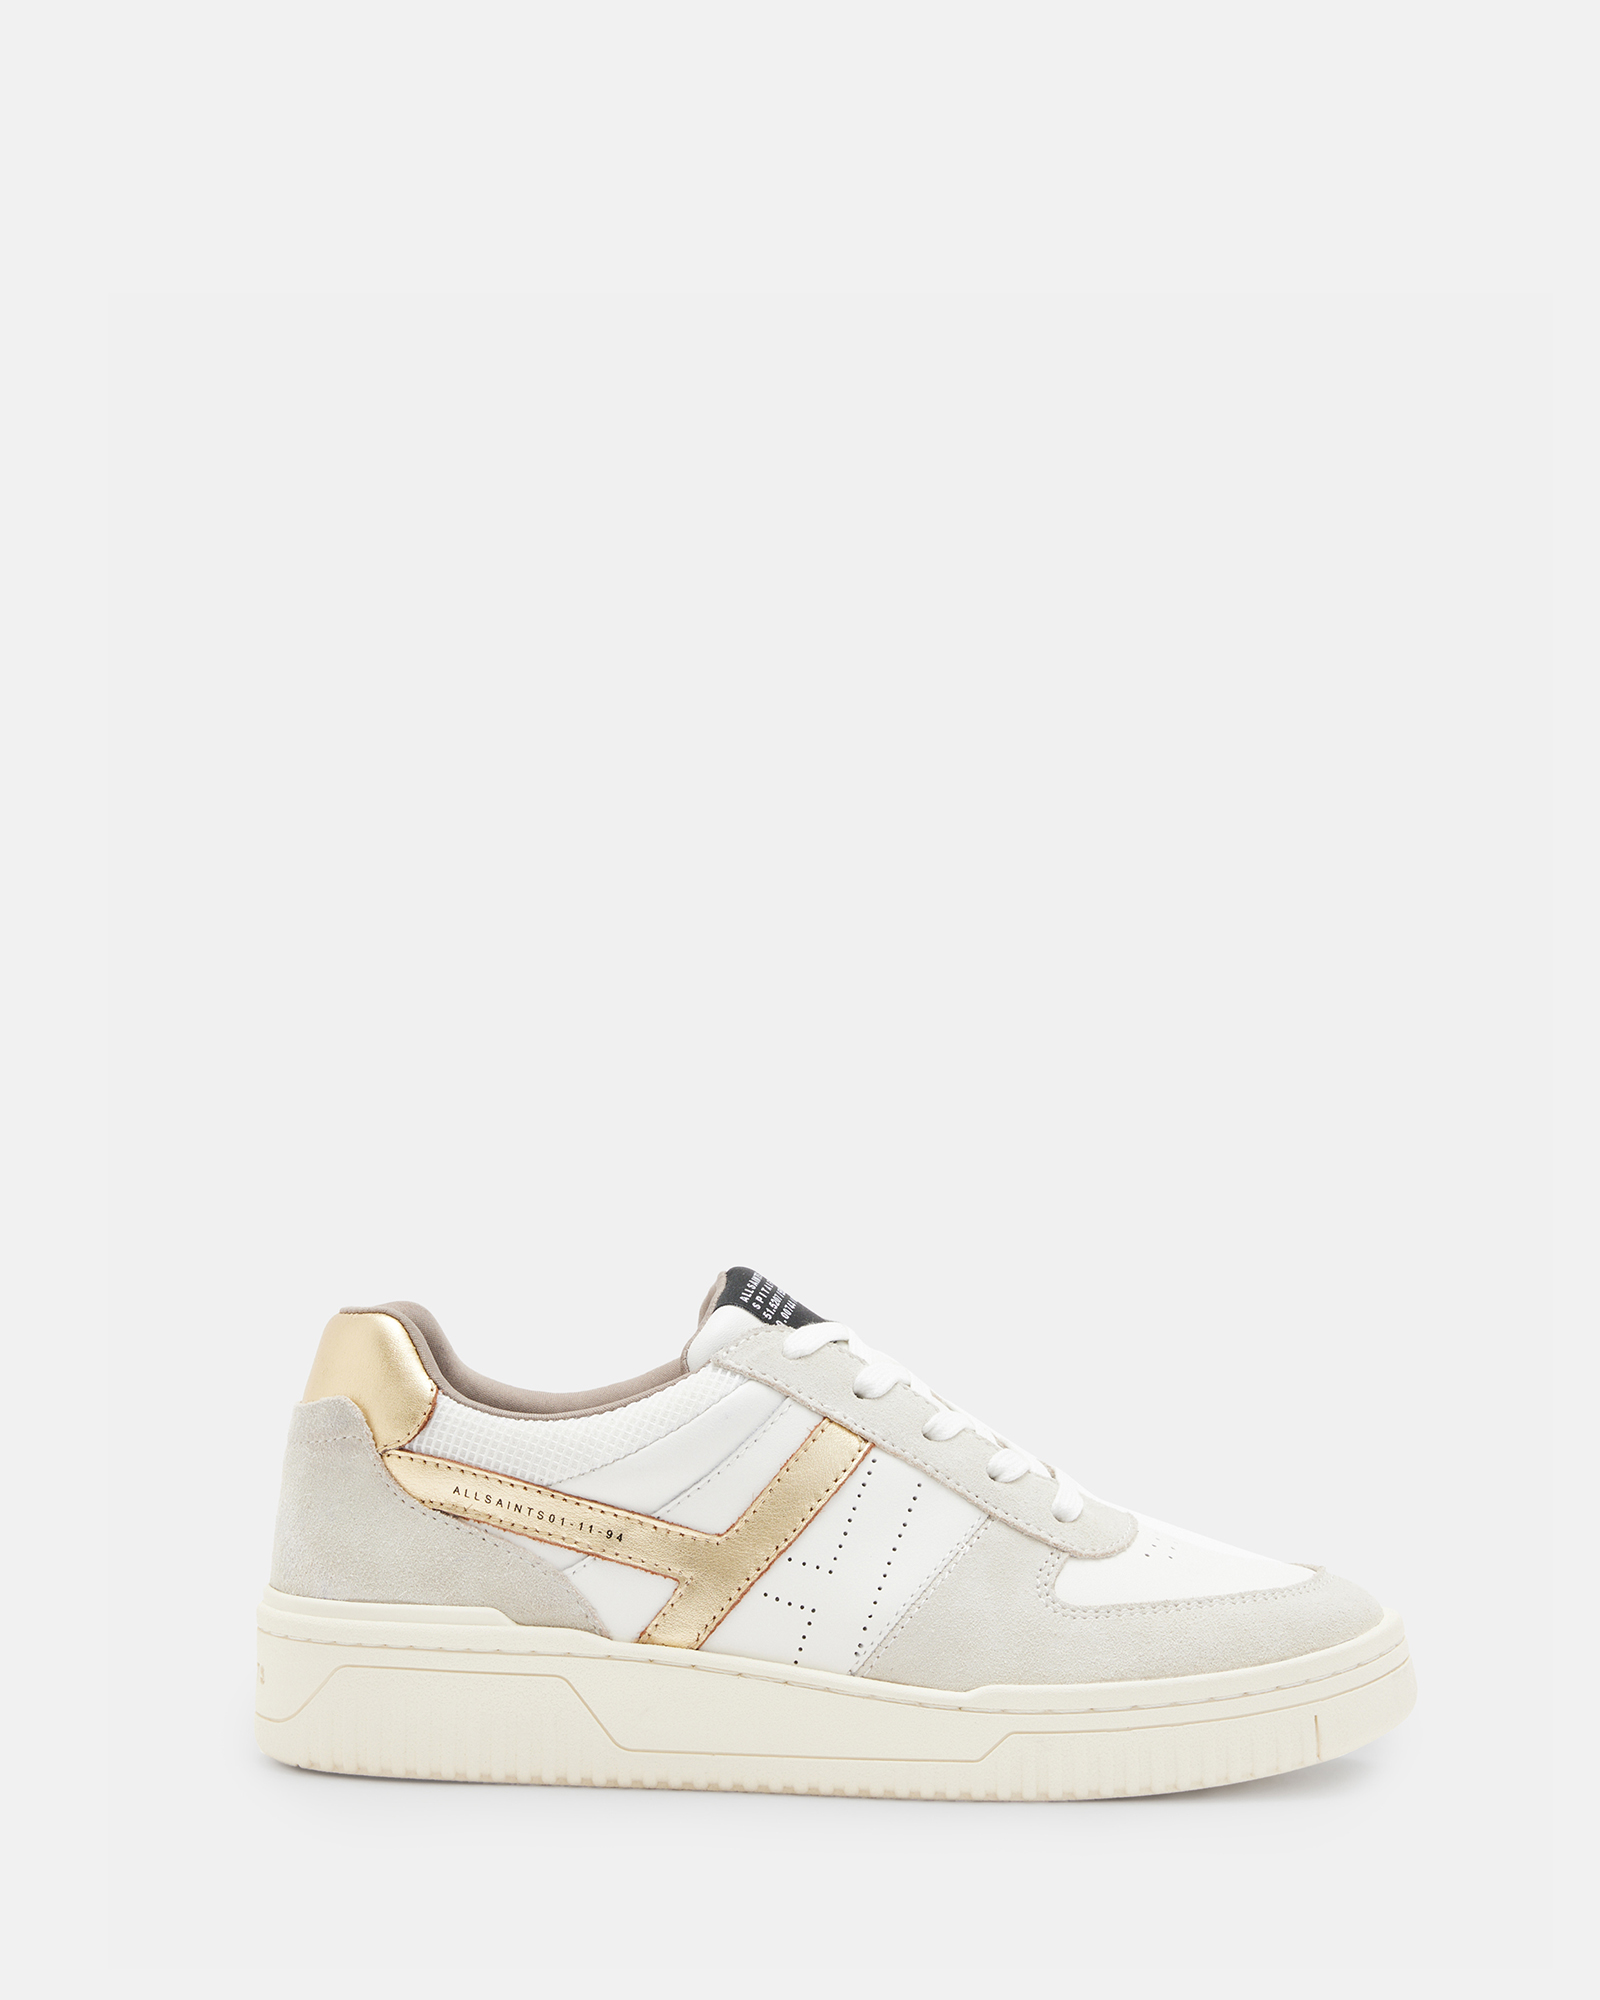 AllSaints Vix Low Top Round Toe Suede Trainers,, White, Size: UK